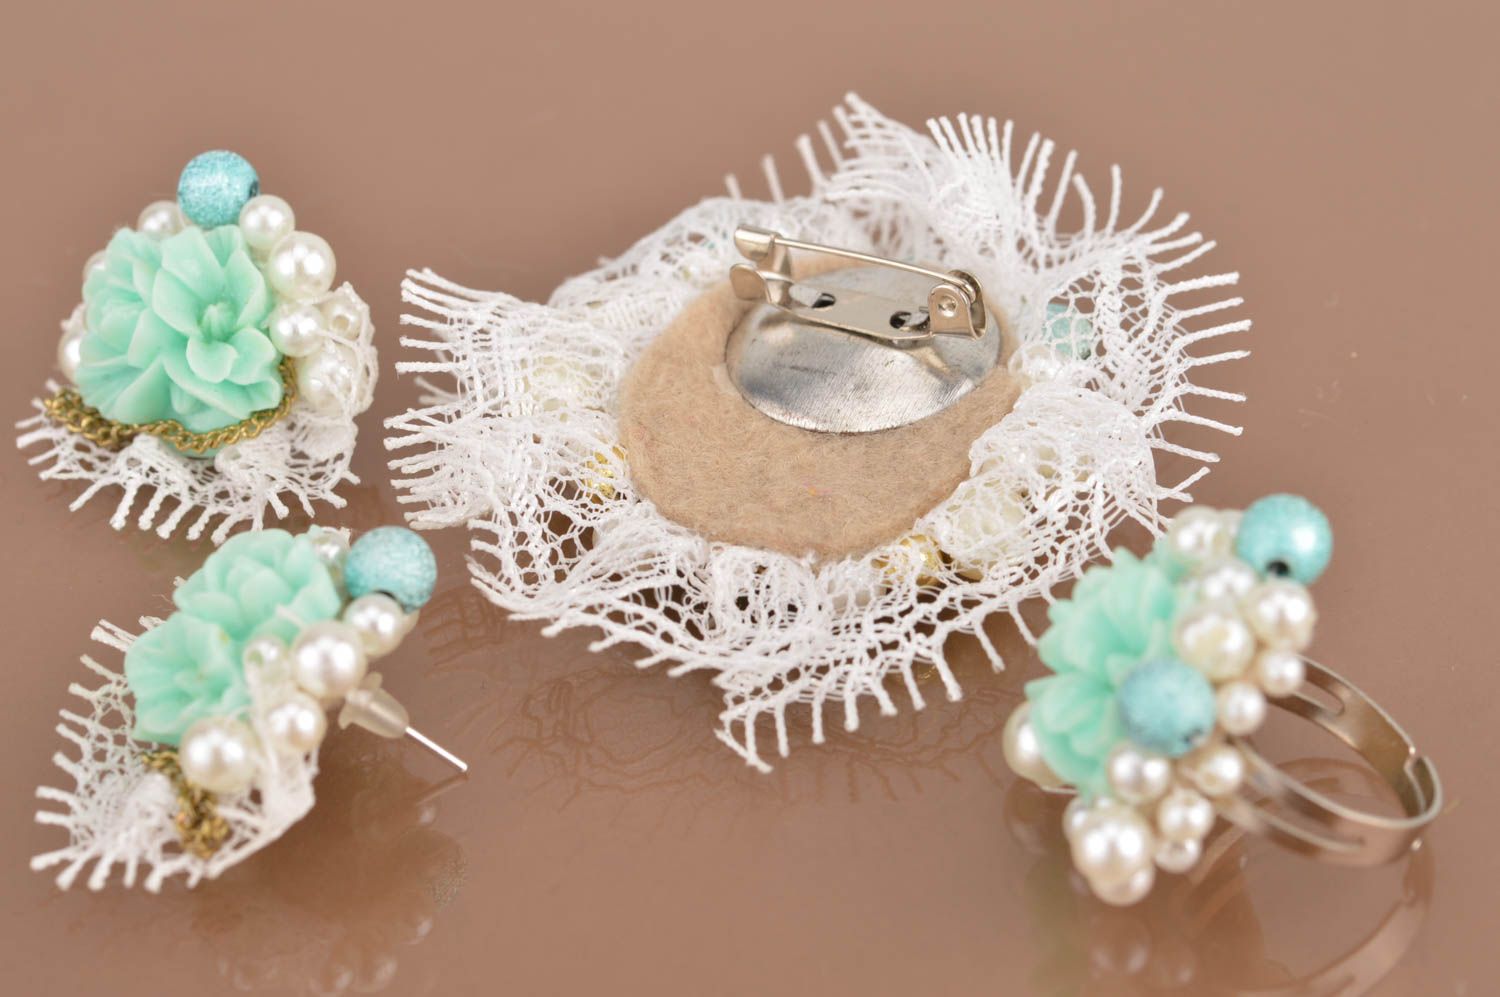 Handmade set of jewelry ring brooch and earrings made of lace and beads photo 5